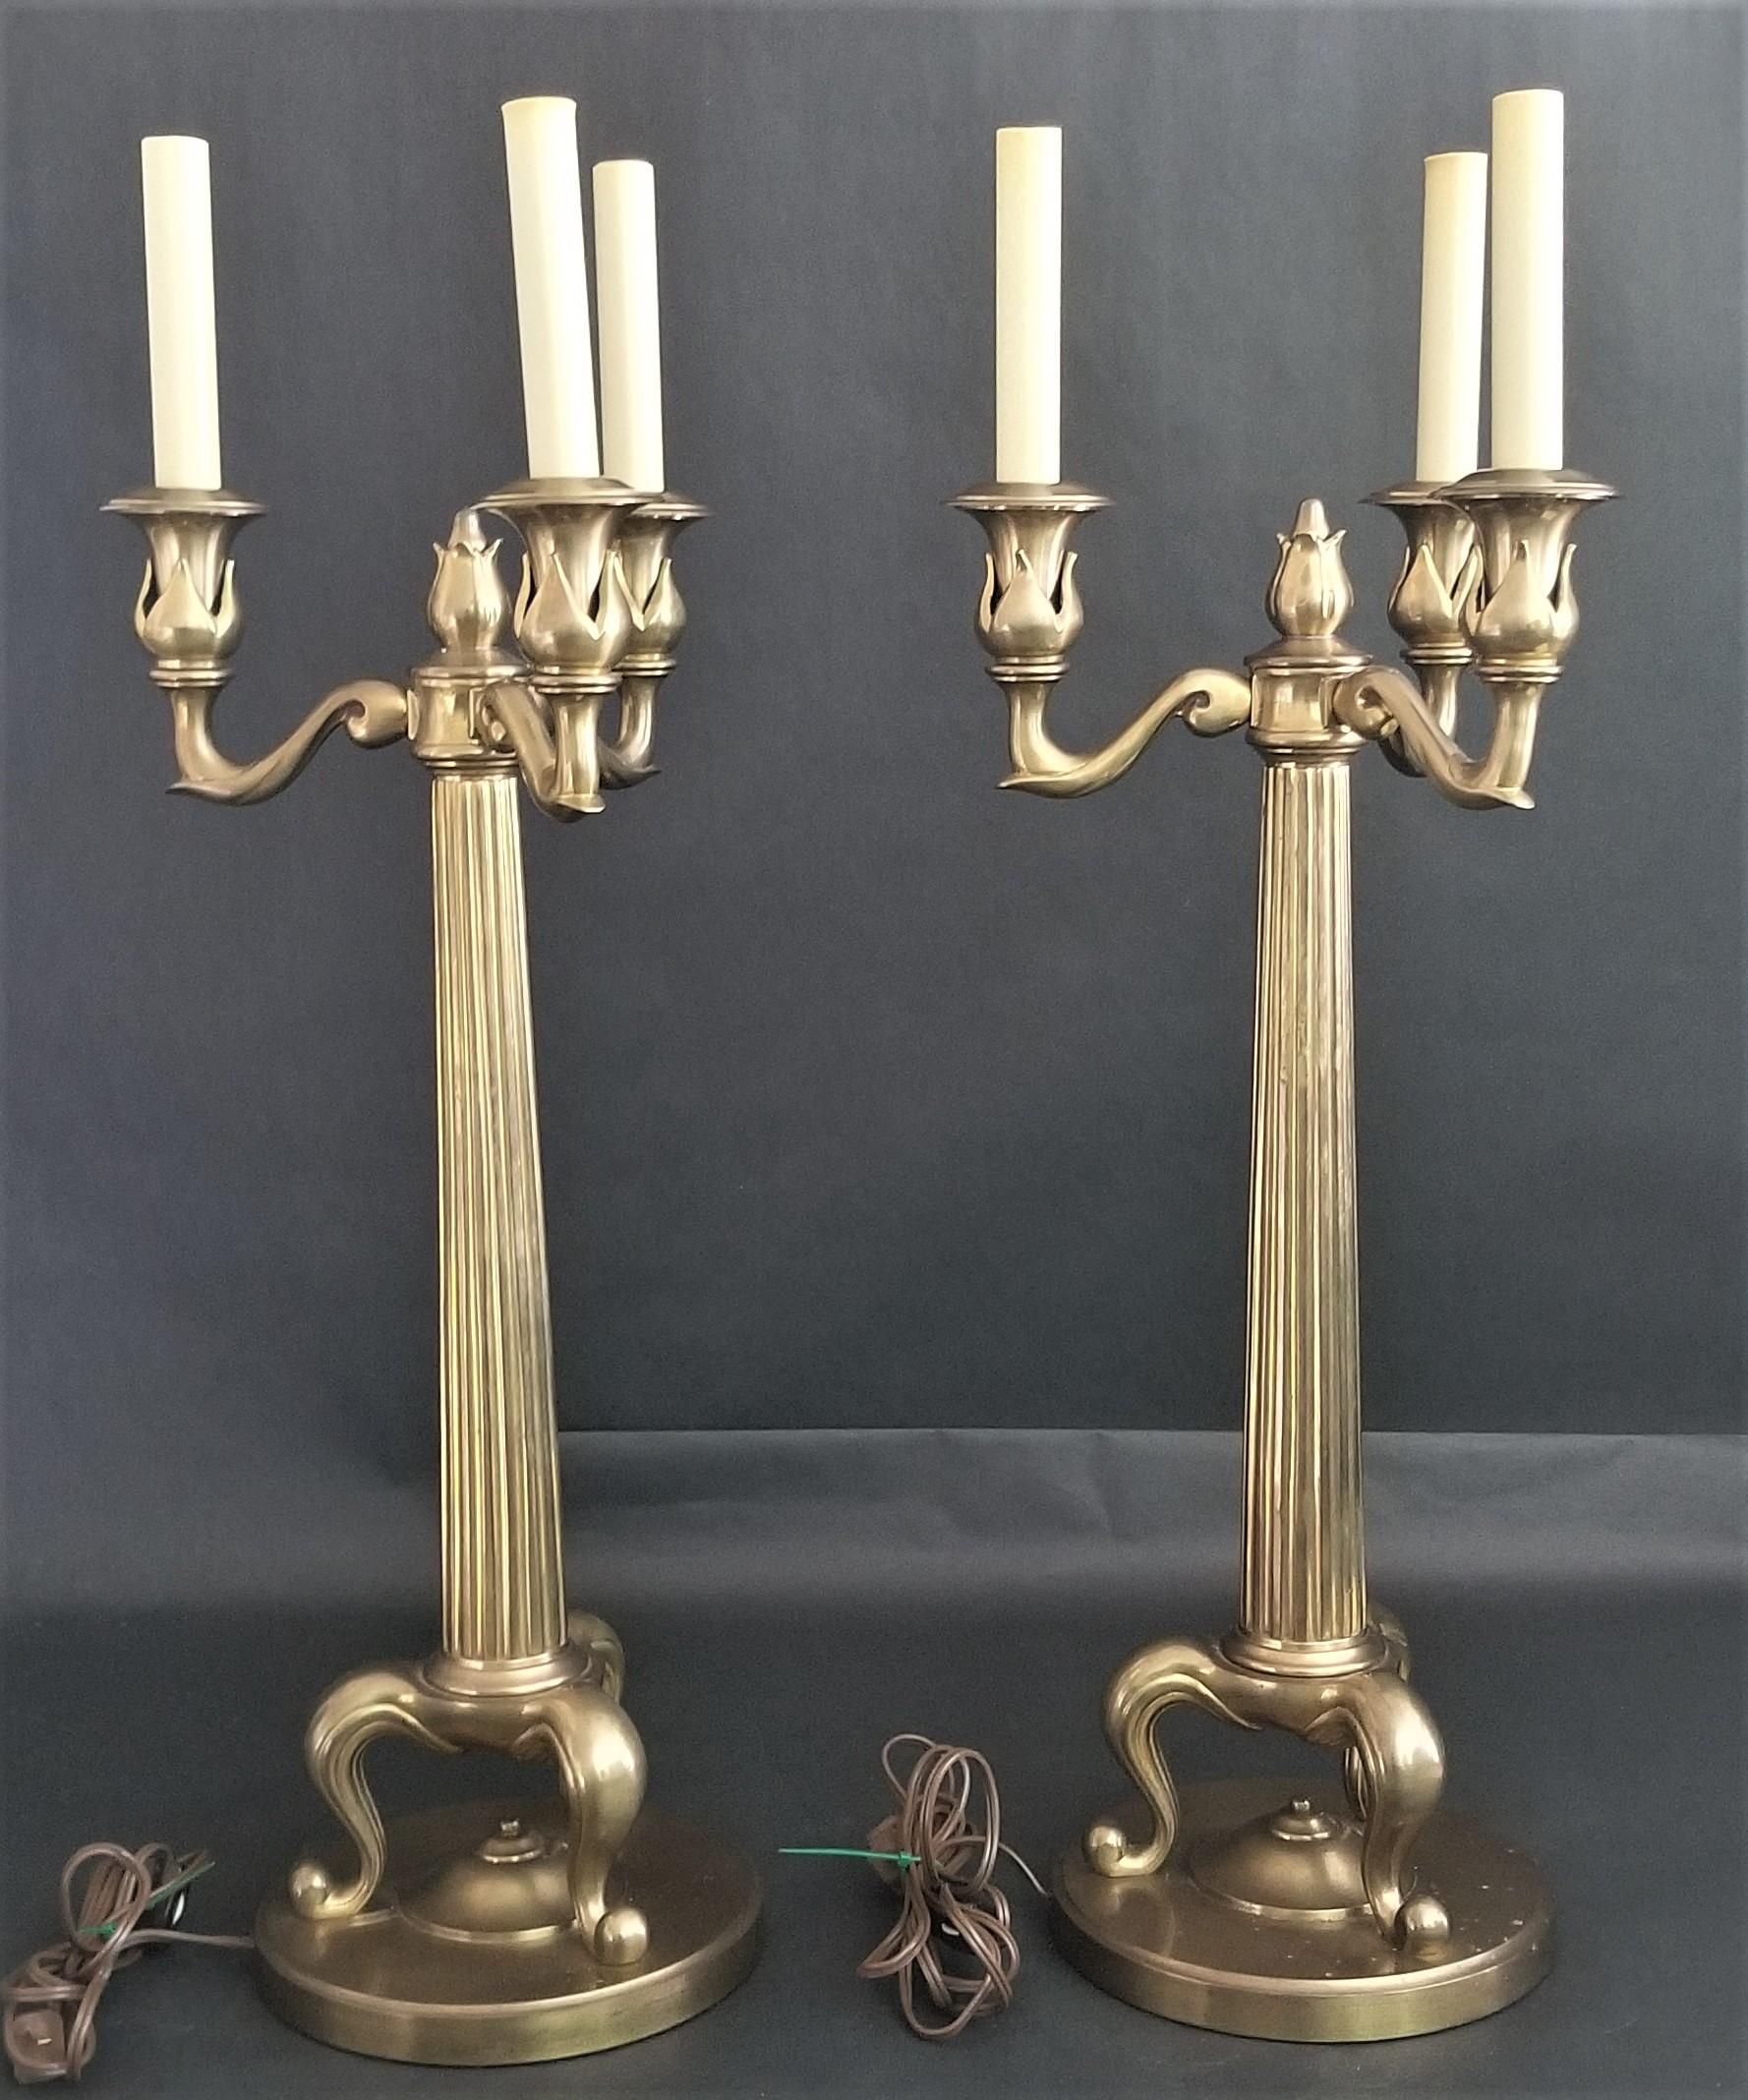 Chapman Heavy Brass Candelabra Fluted Column Table Lamps In Good Condition For Sale In Lake Worth, FL